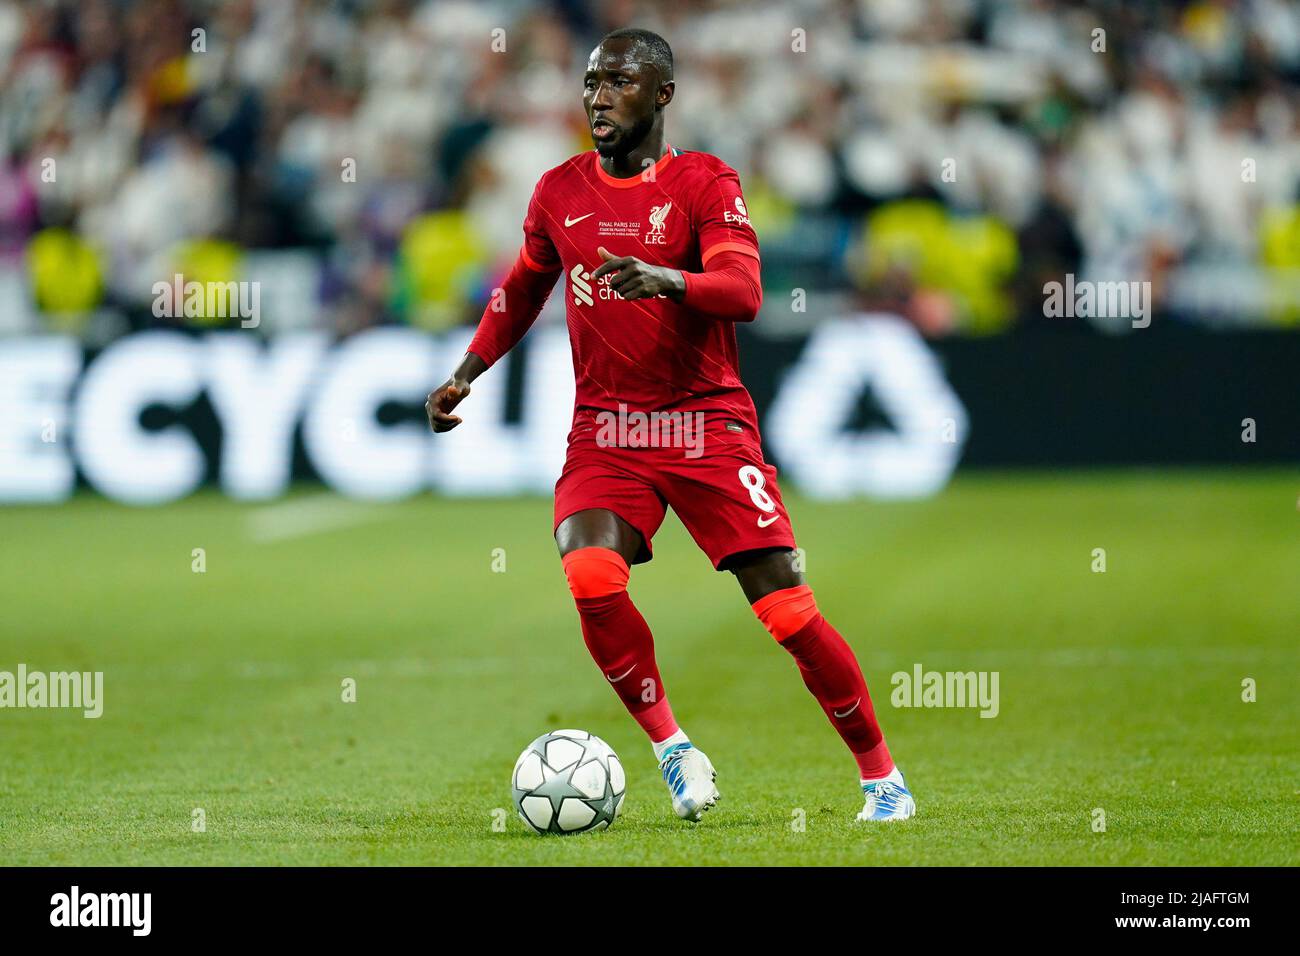 Naby Keita of Liverpool FC during the UEFA Champions League Final match between Liverpool FC and Real Madrid played at Stade de France on May 28, 2022 in Paris, France. (Photo / Magma) Stock Photo